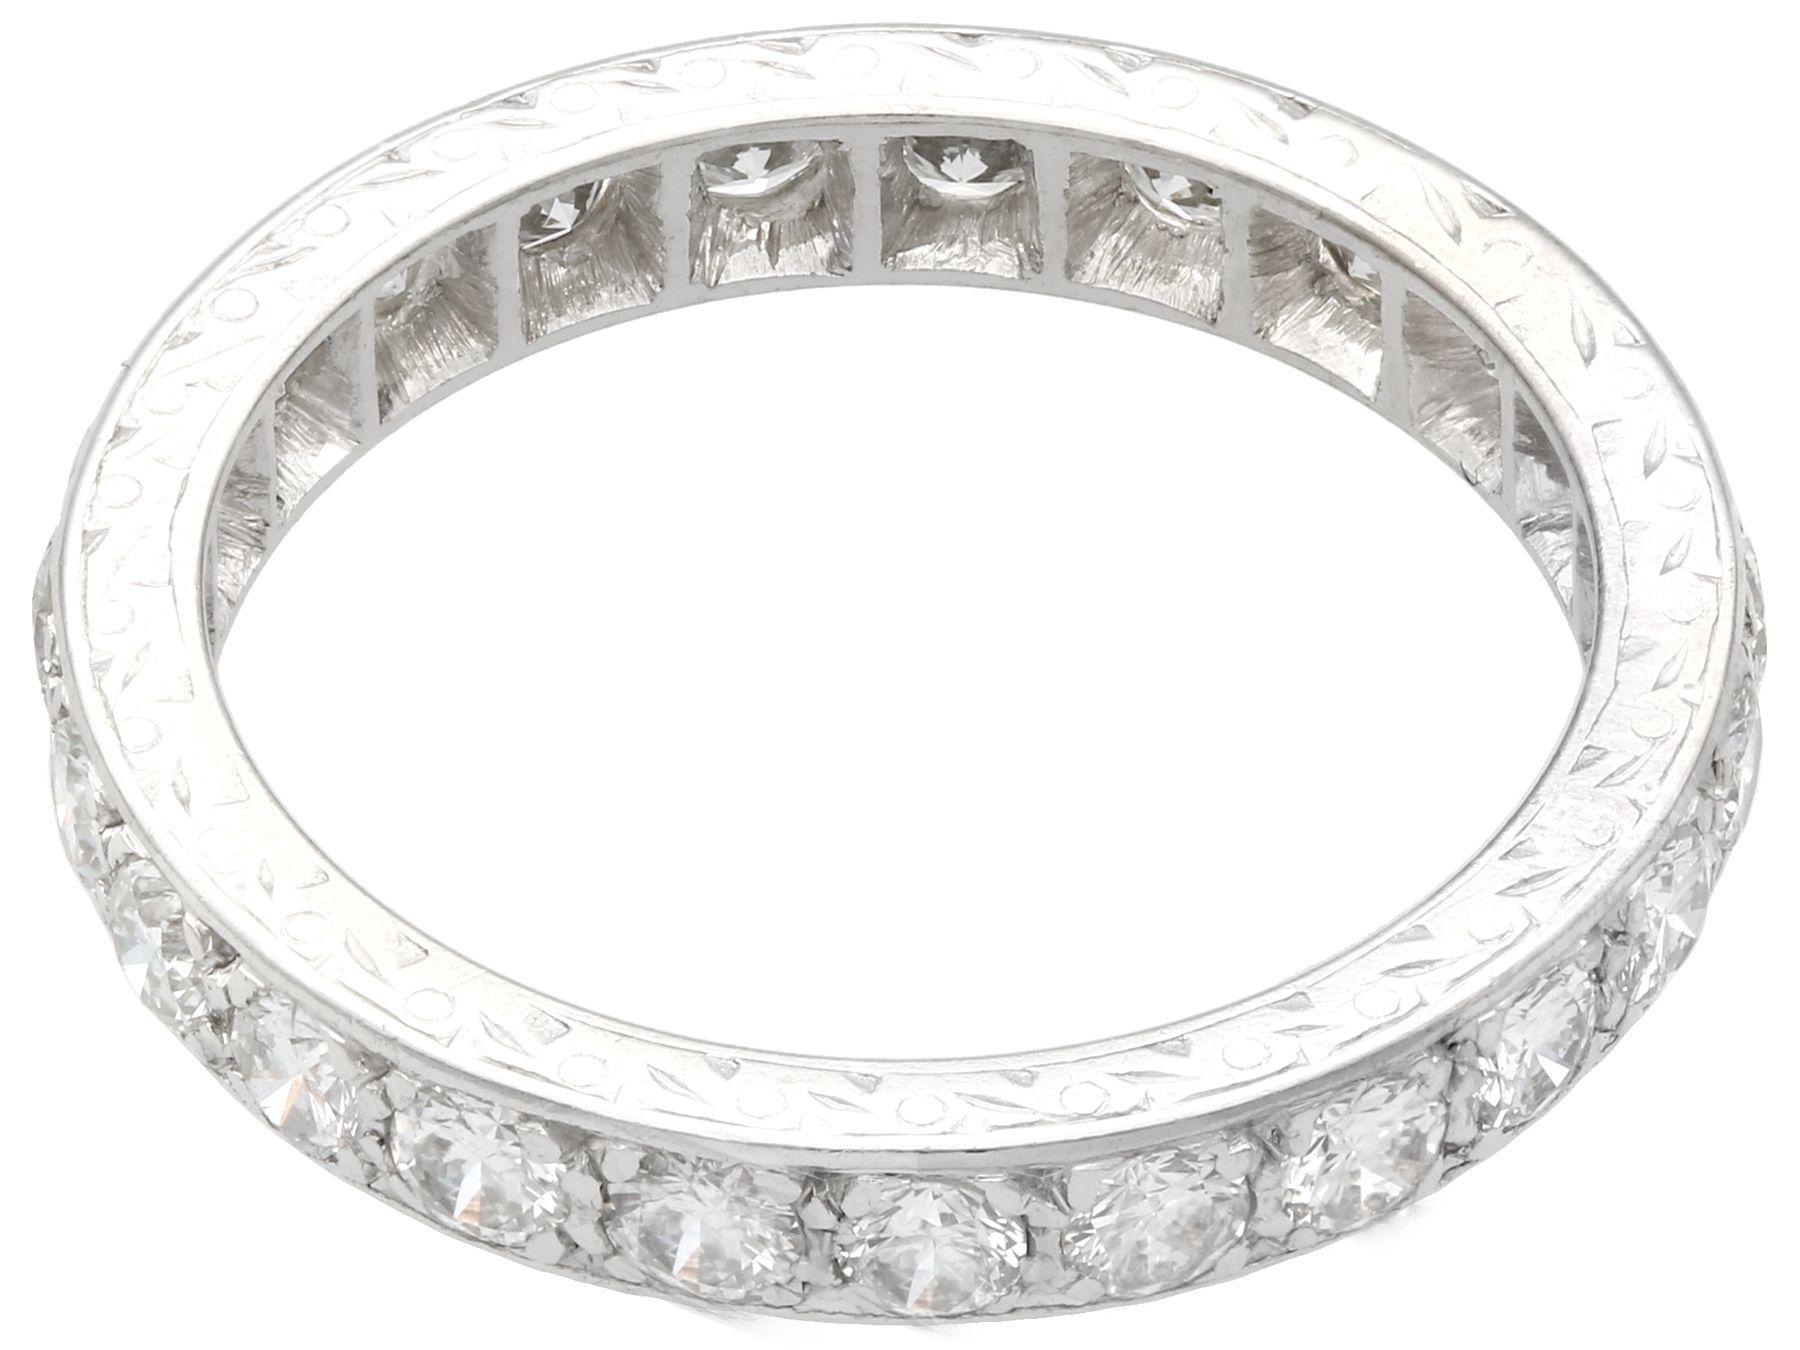 Antique 1.92 Carat Diamond and White Gold Full Eternity Ring In Excellent Condition For Sale In Jesmond, Newcastle Upon Tyne